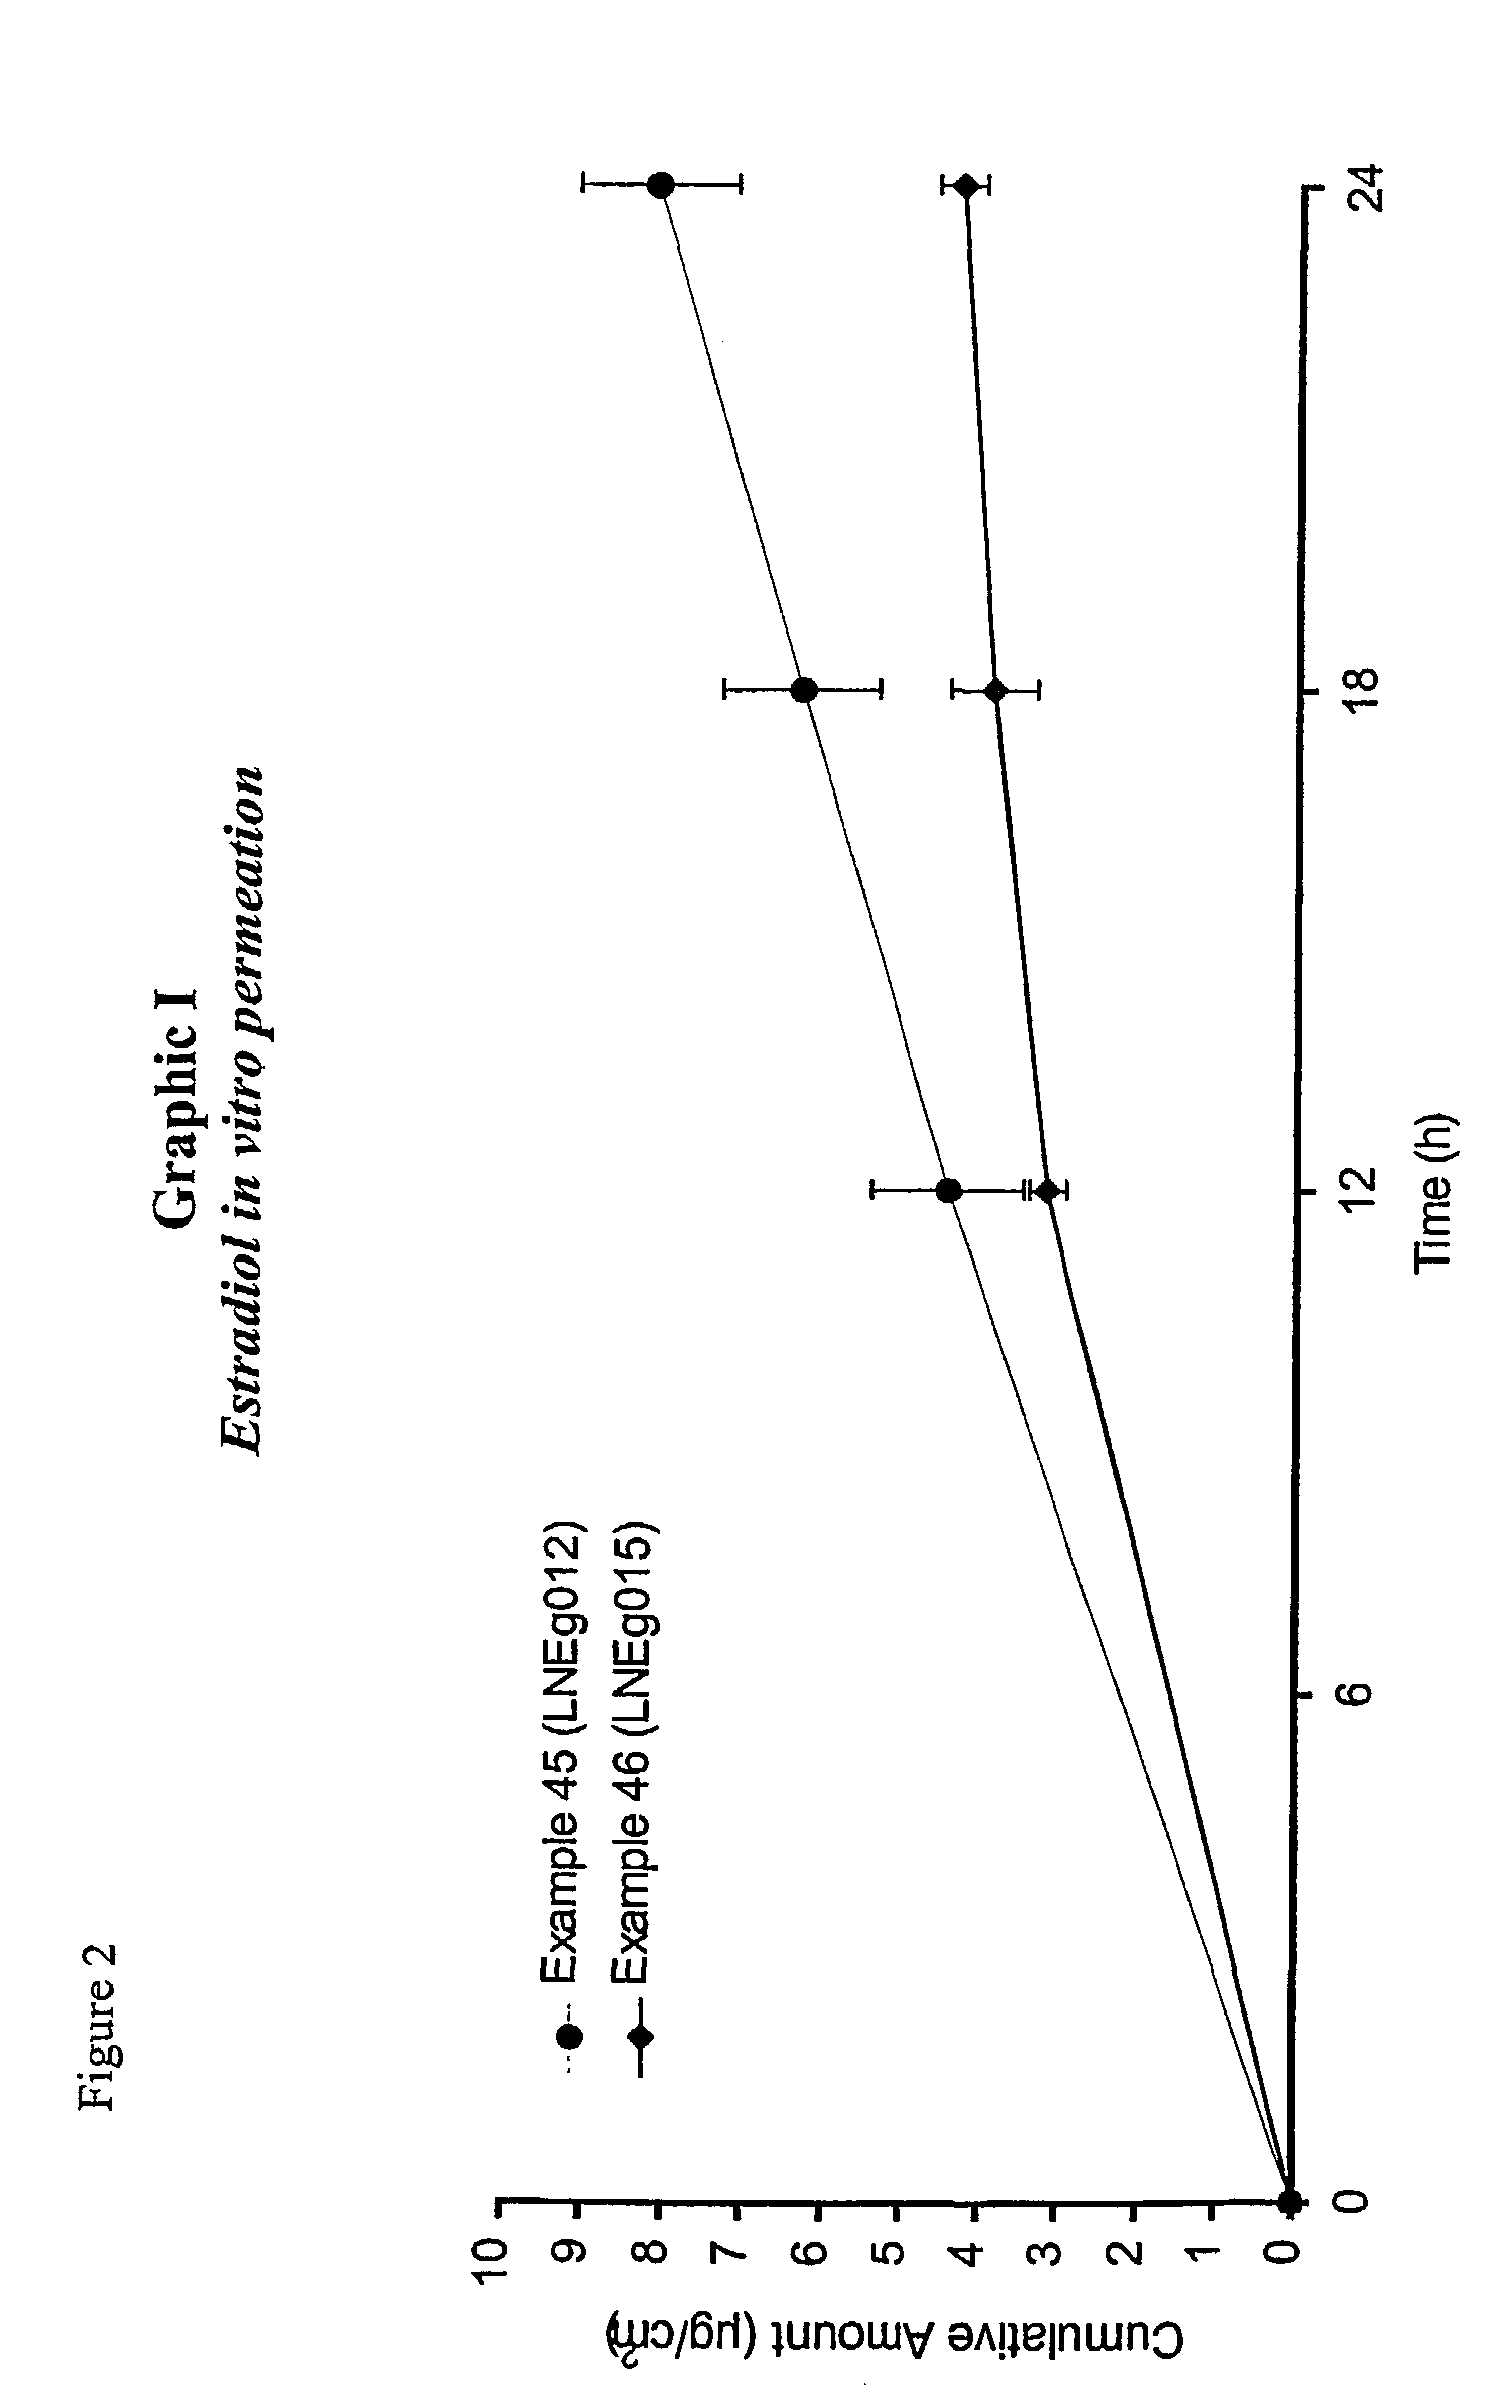 Composition for transdermal and/or transmucosal administration of active compounds that ensures adequate therapeutic levels